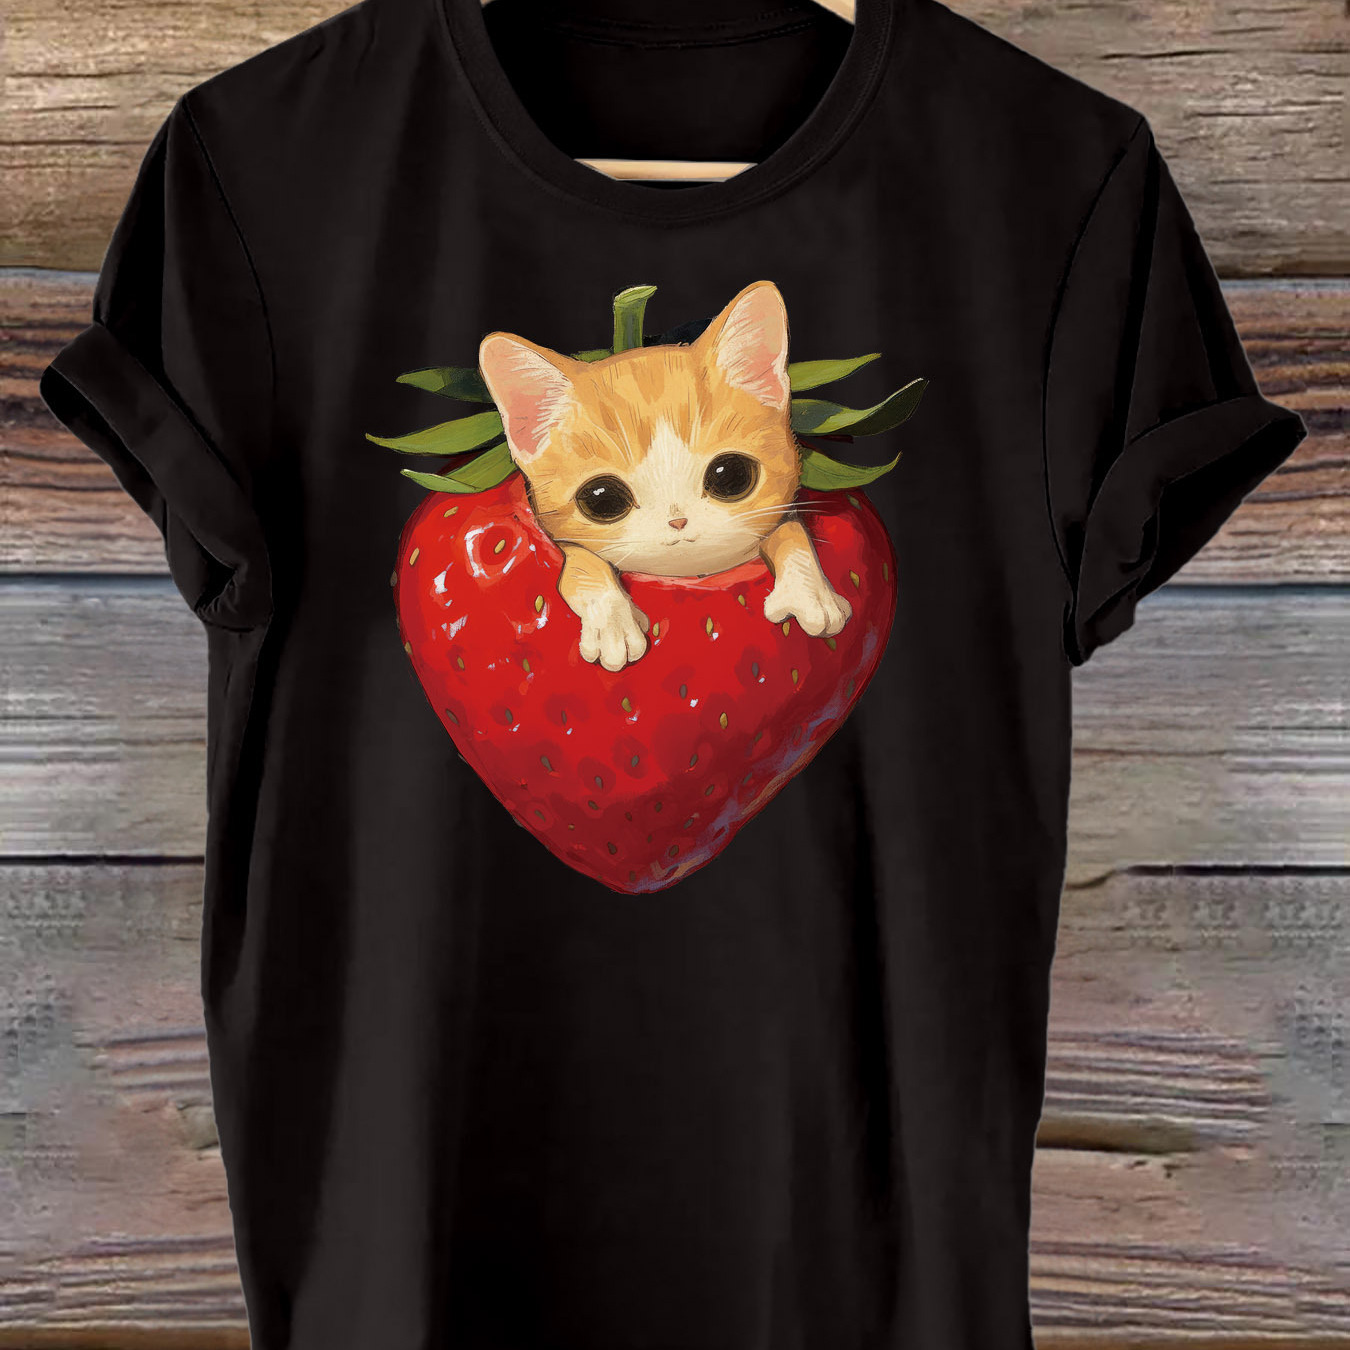 

Cat & Strawberry Print T-shirt, Short Sleeve Crew Neck Casual Top For Summer & Spring, Women's Clothing